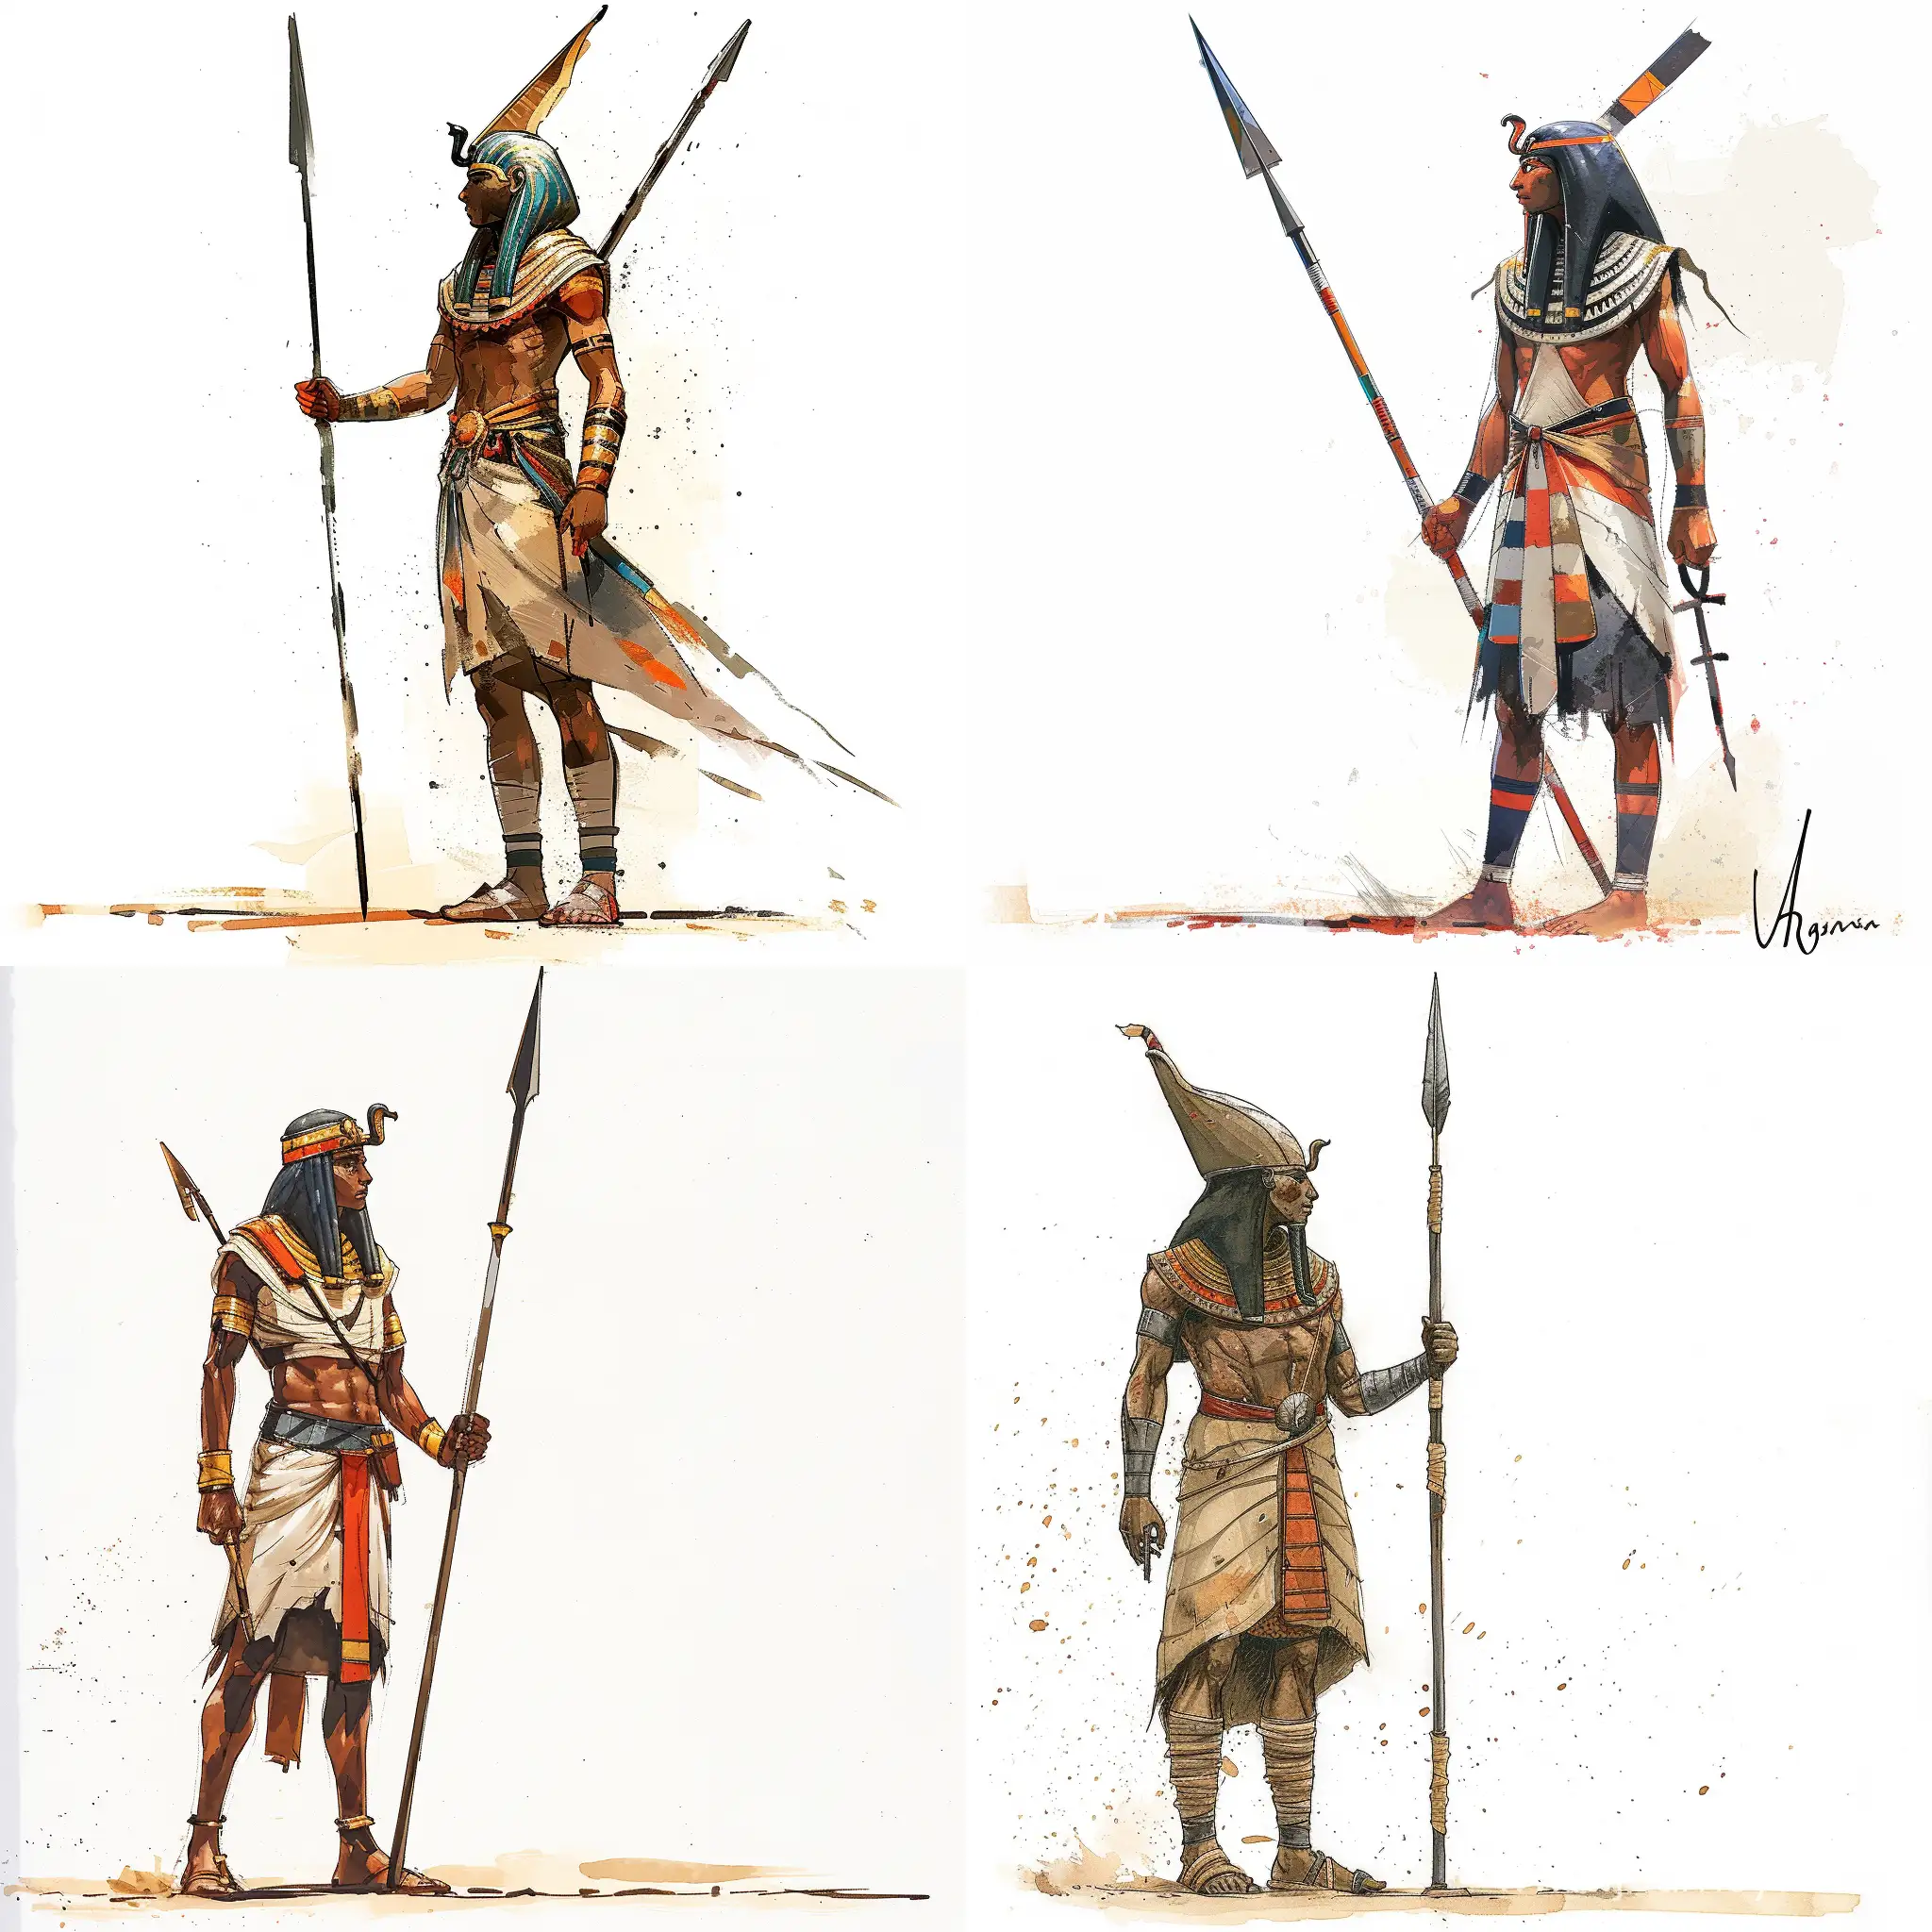 an ancient Egyptian warrior, standing tall, in combat gear, holding a spear, stylized caricature, decorative, neat, without splashes, bright colors, Victor Ngai, watercolor, ink, on a white background, flat drawing